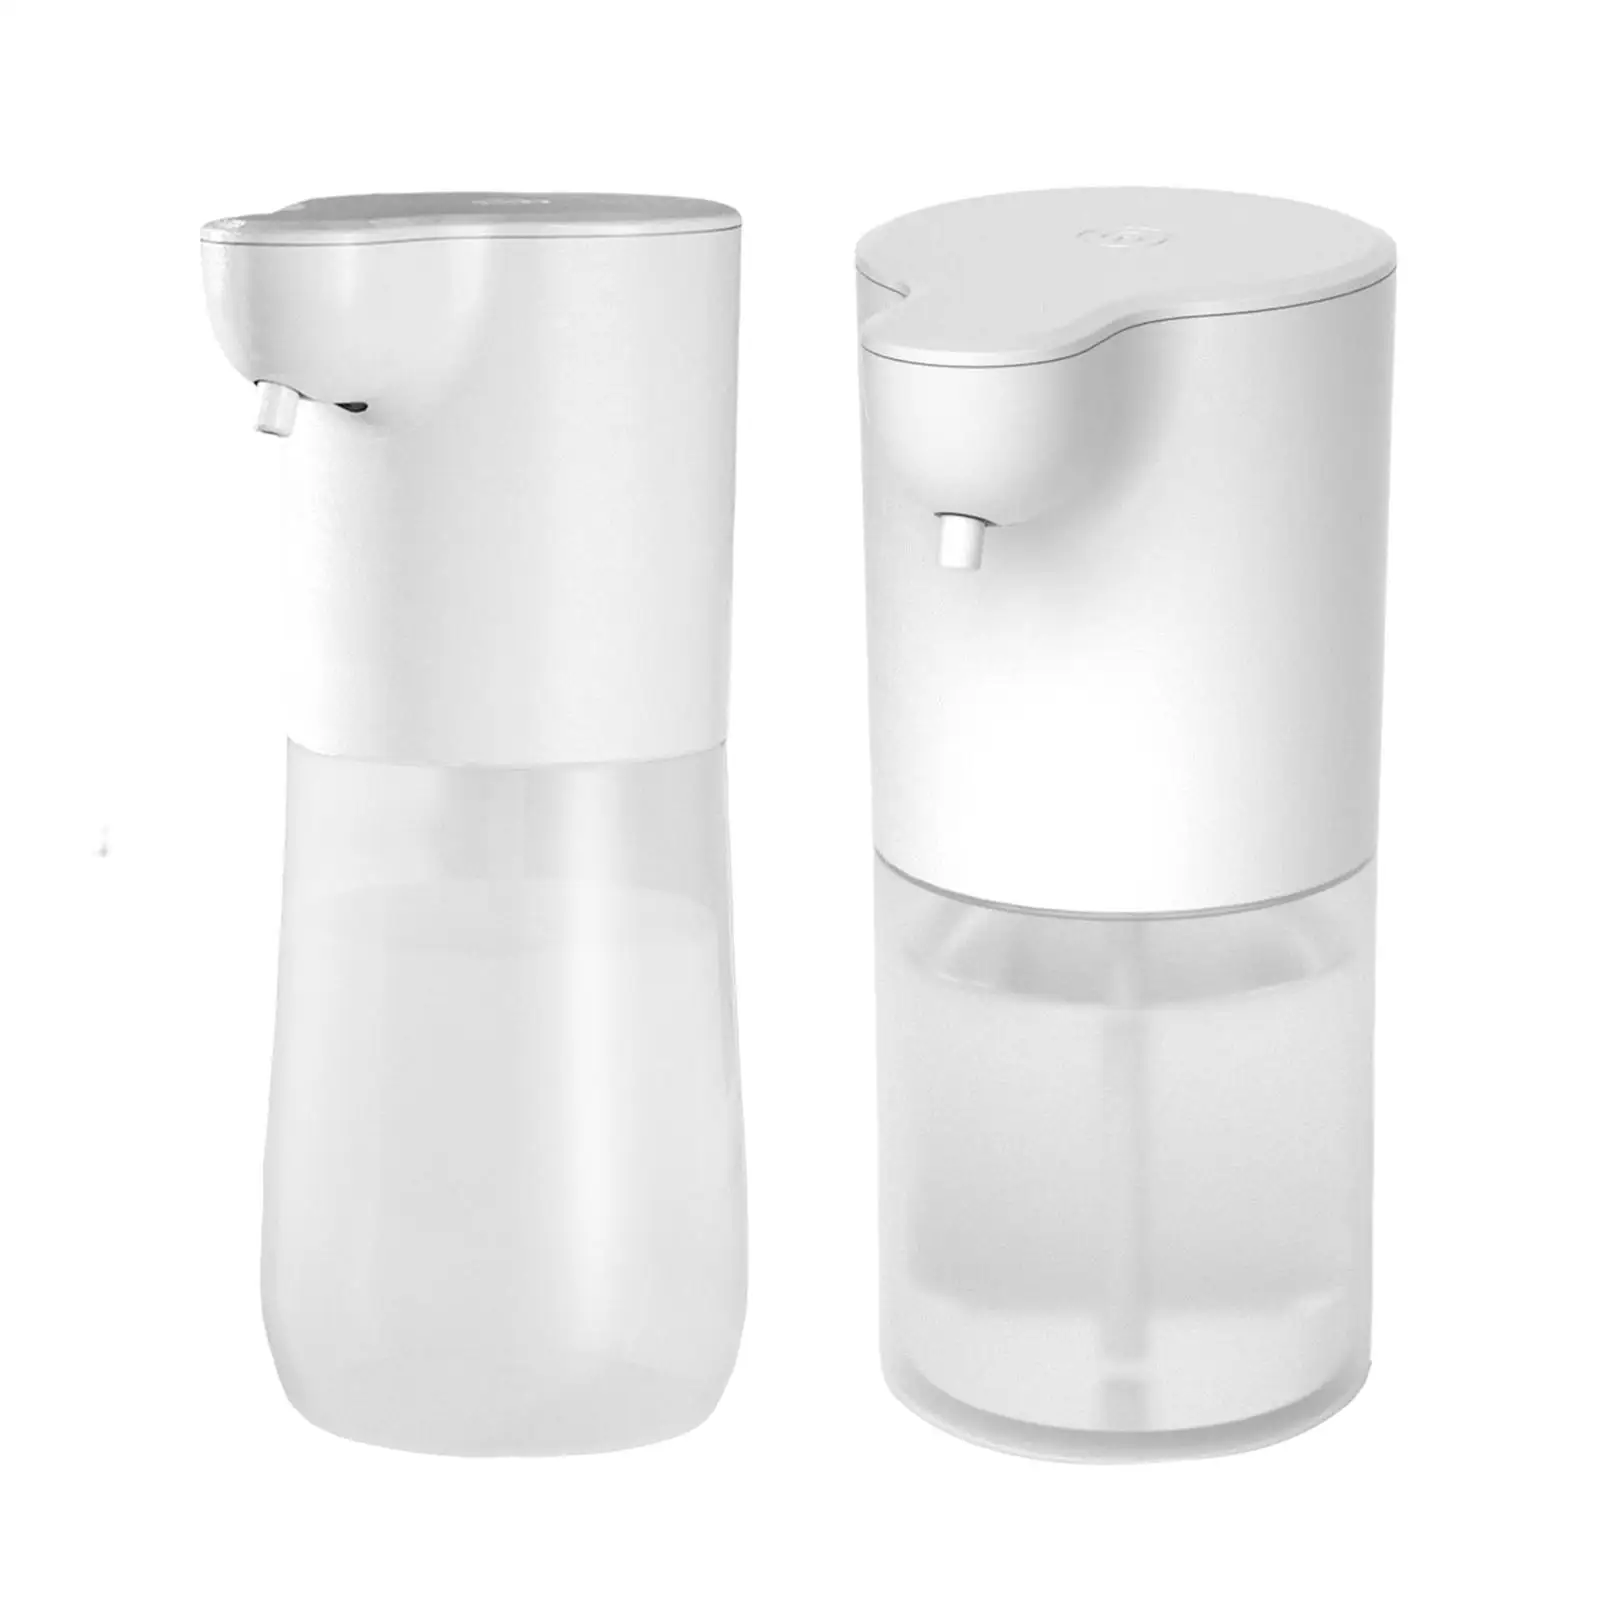 Automatic Liquid Soap Dispenser Induction Washing Hand Dispensers for Bathroom